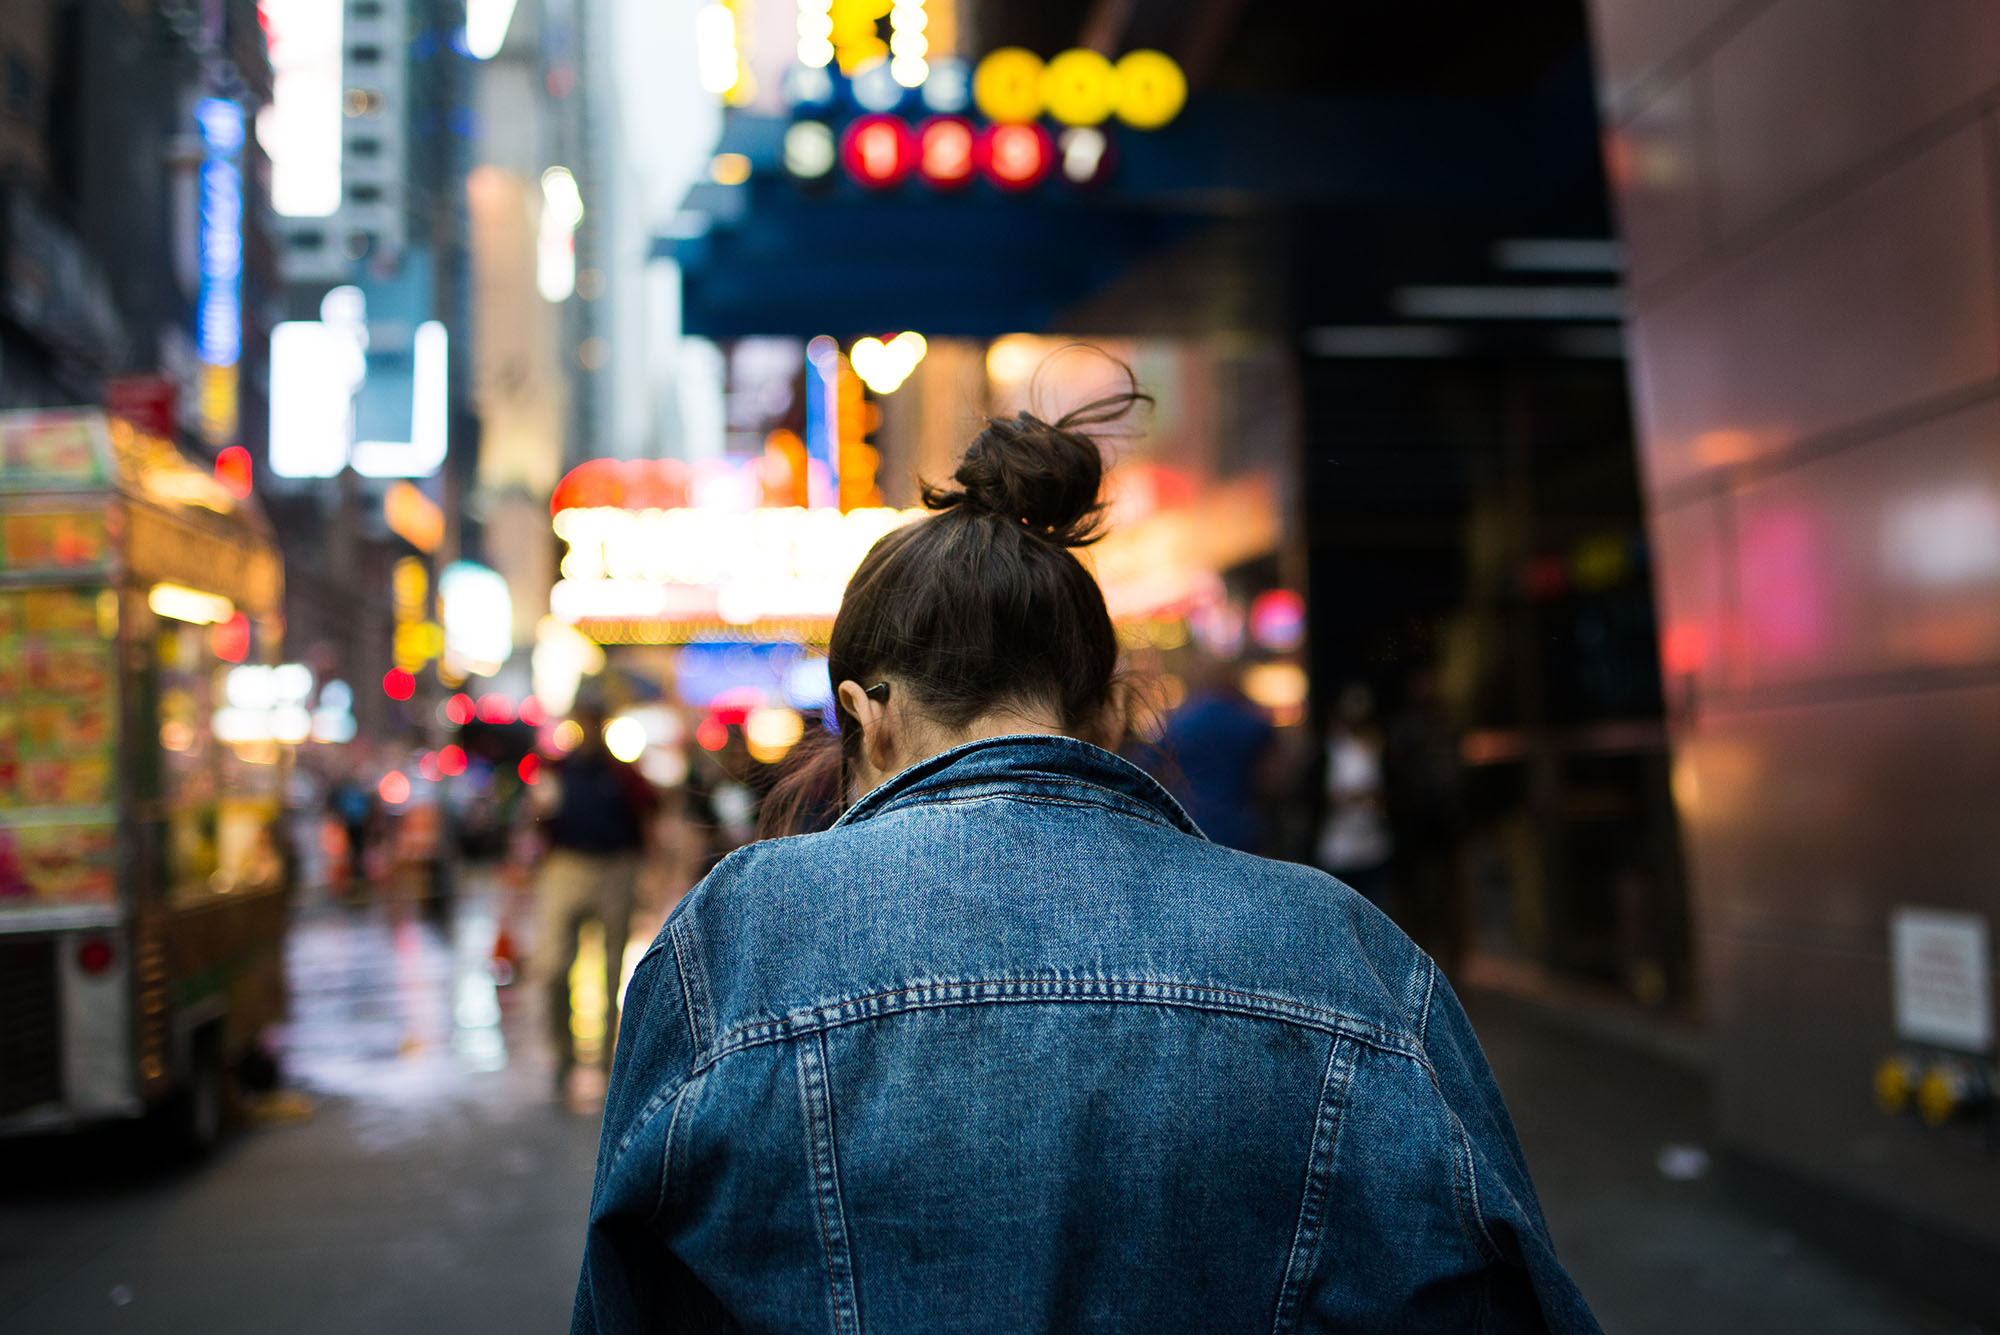 Person walking in New York City with bright signs and lights blurred in the background